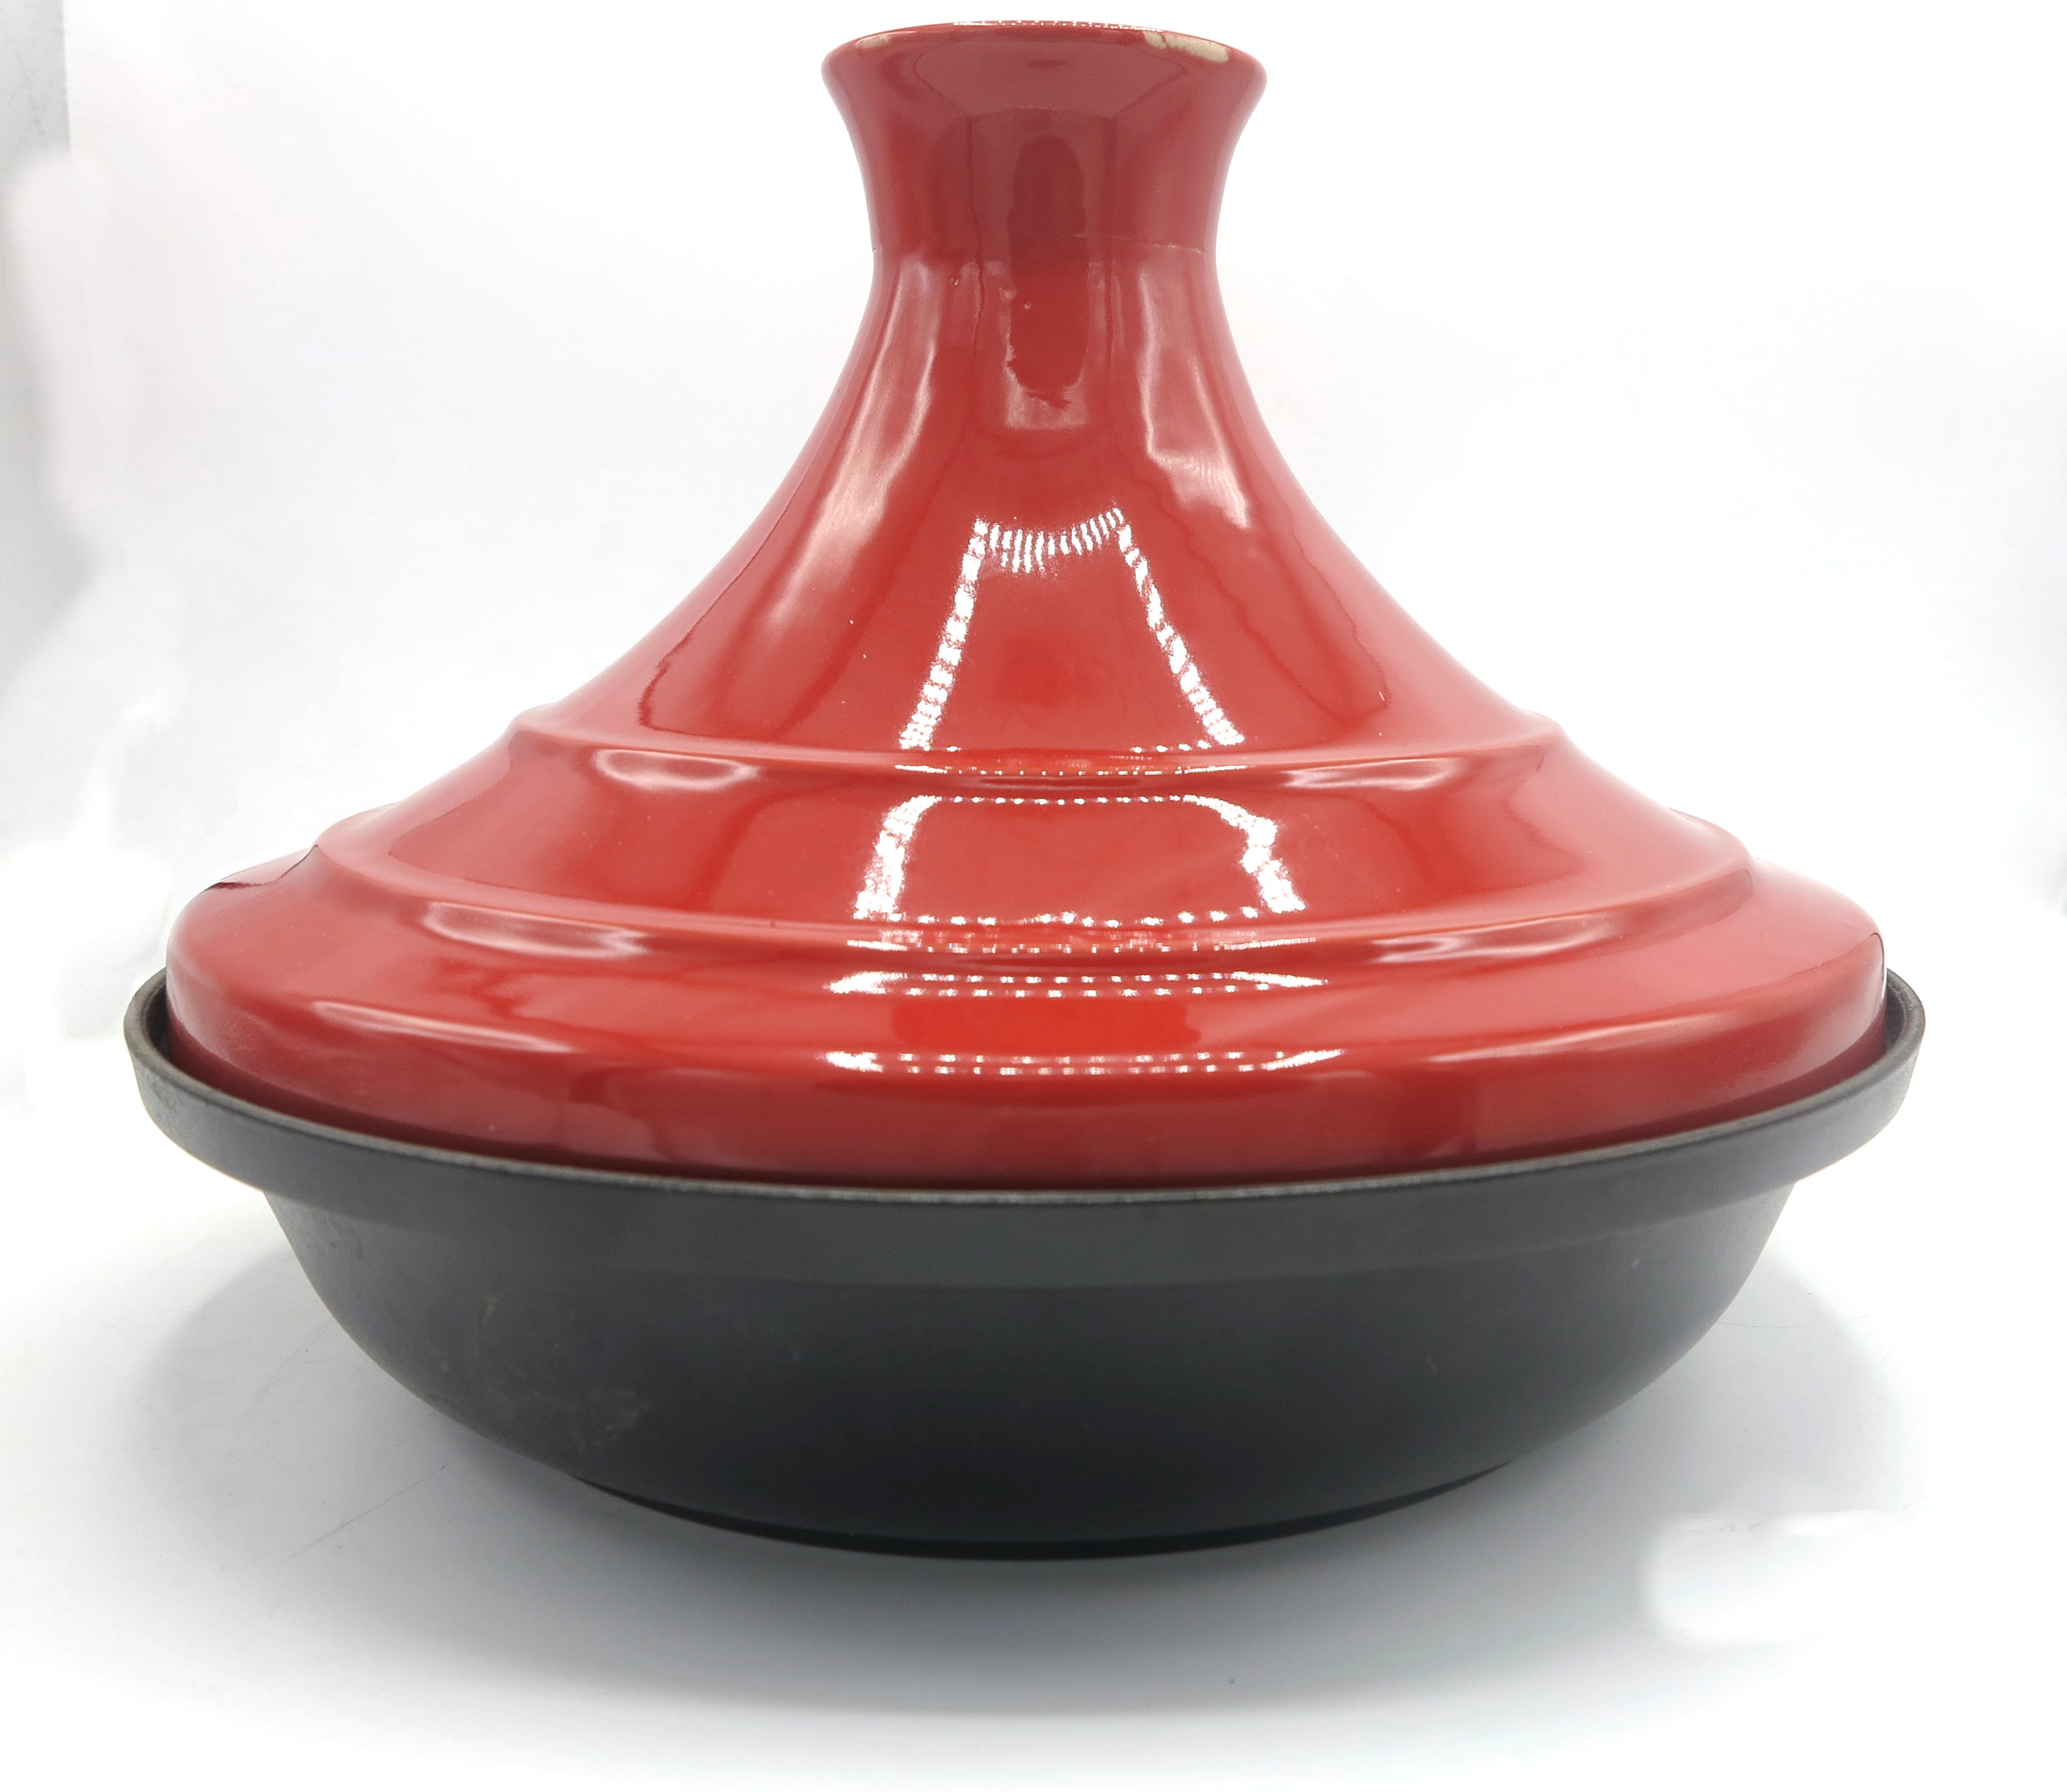 Red color Moroccan Tagine Enameled Cast Iron Tagine Pot